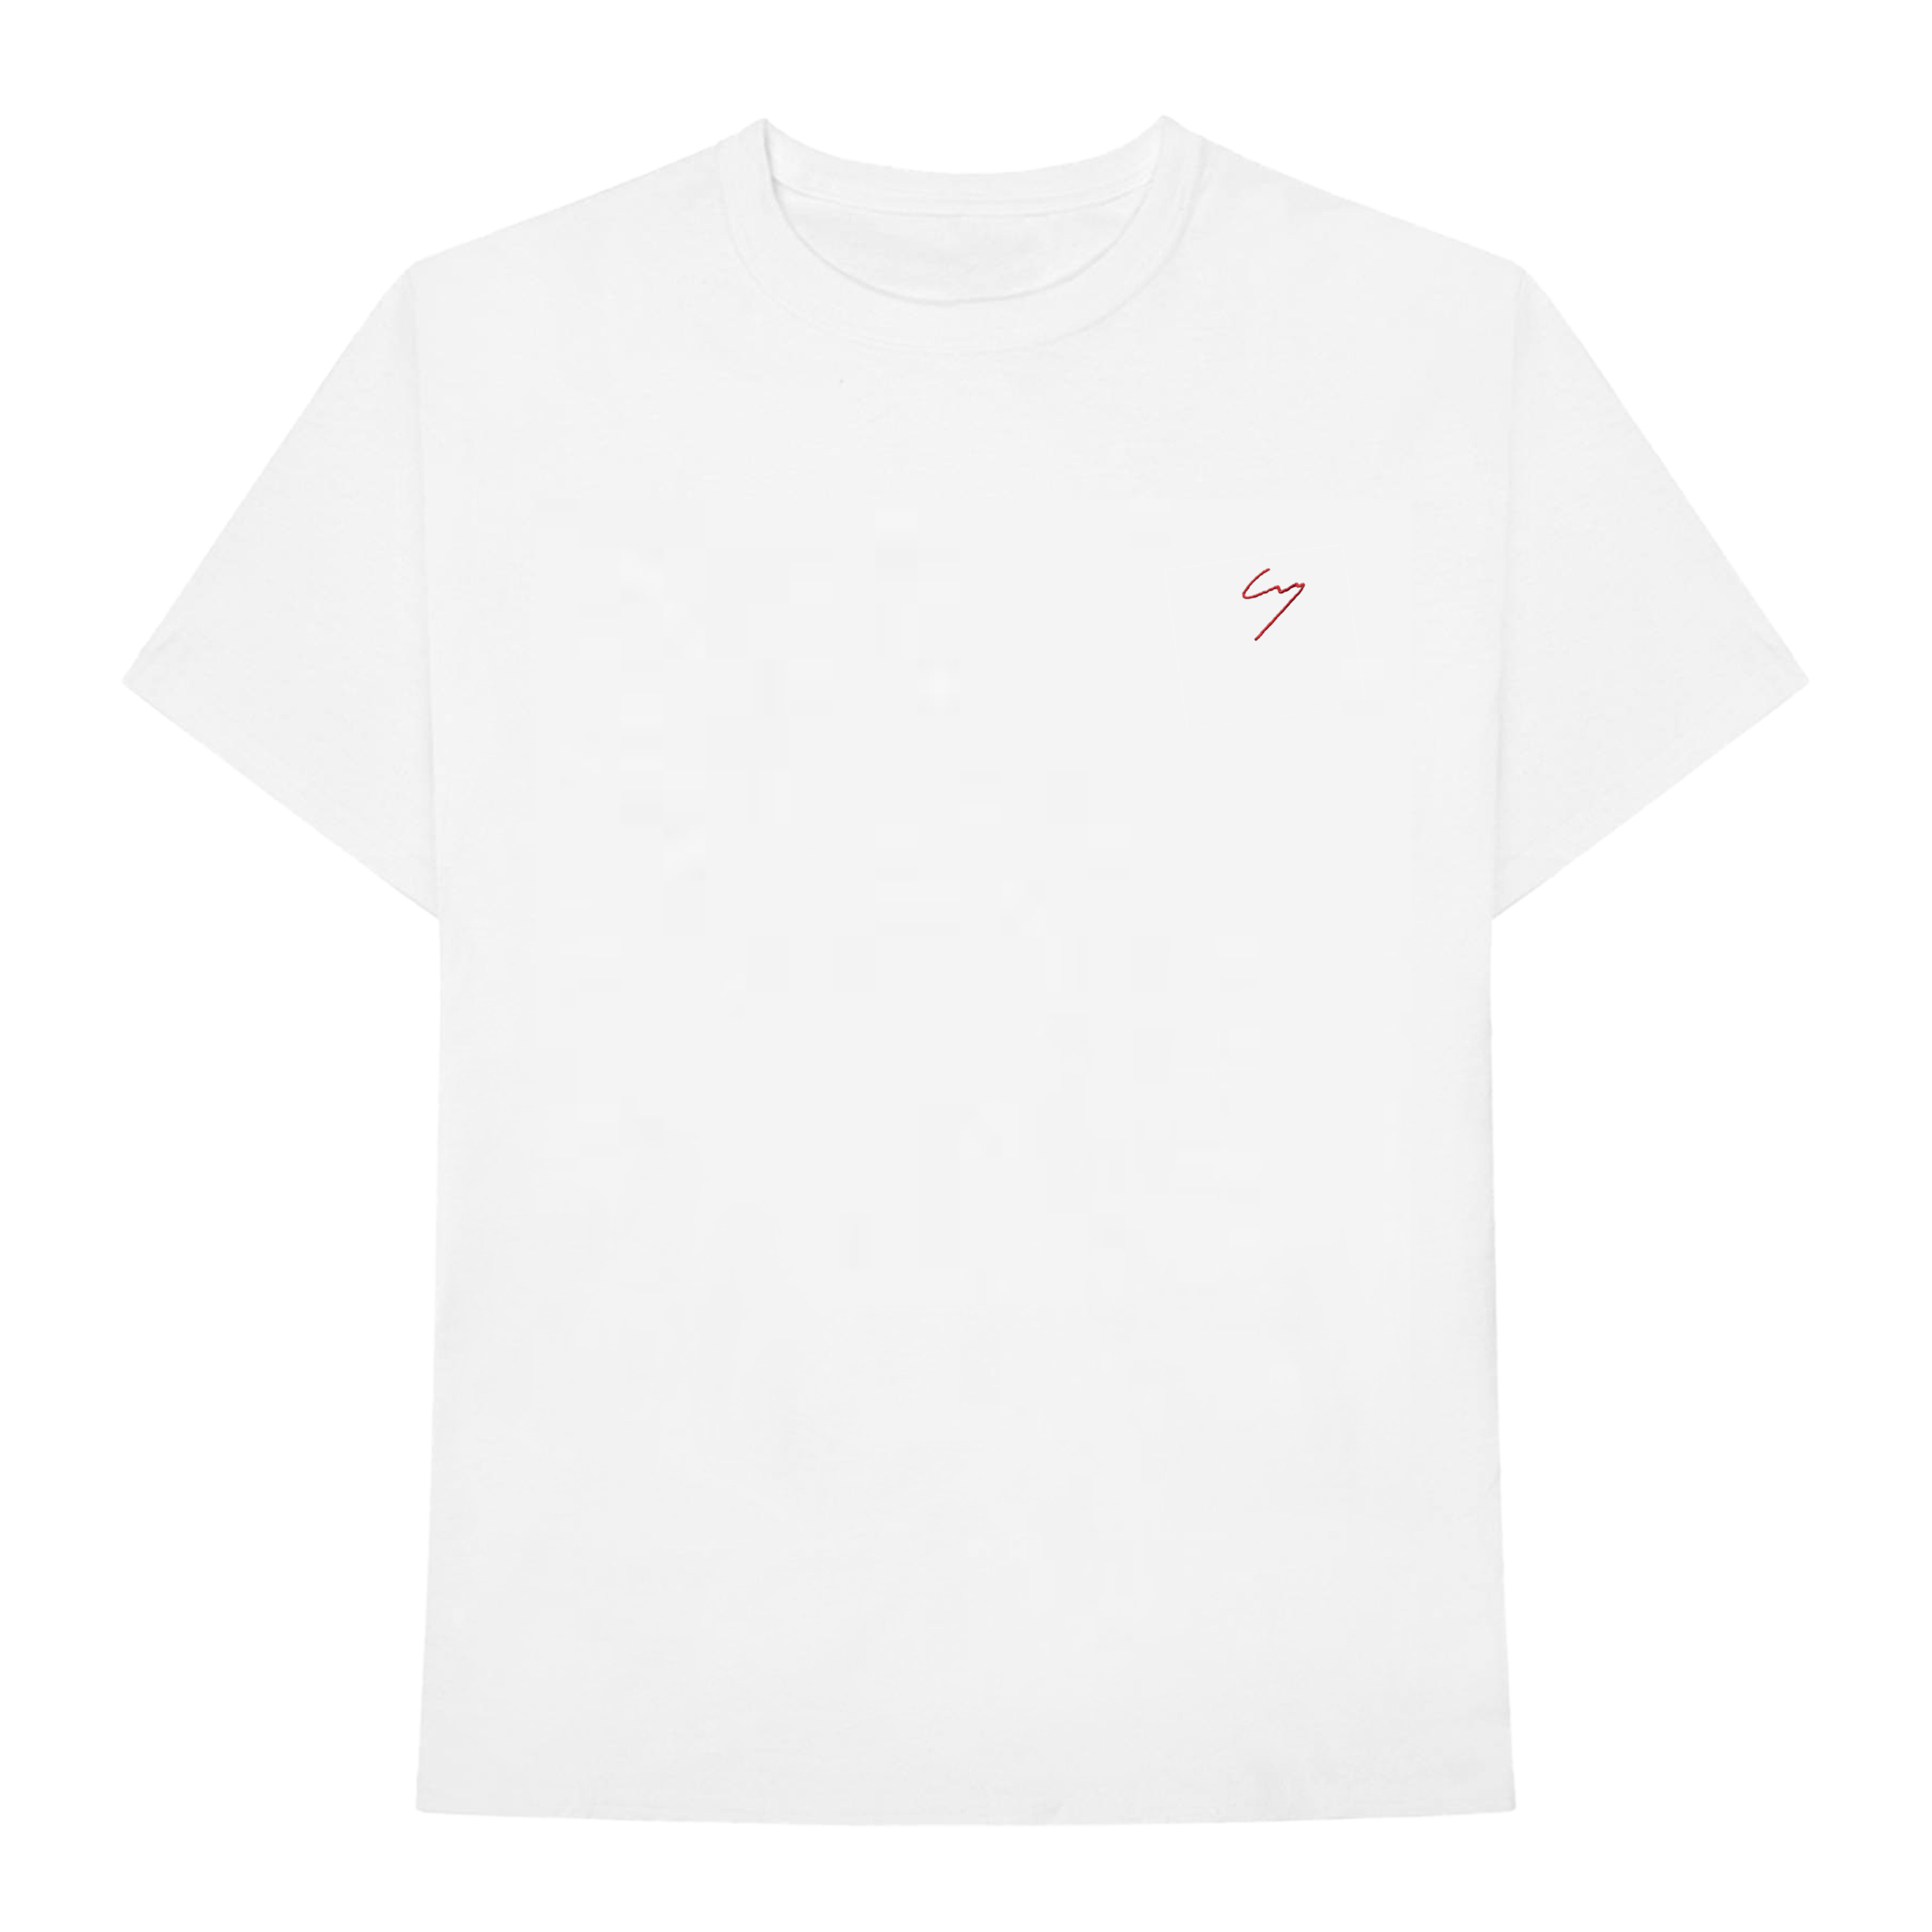 EMBROIDED LOGO T-SHIRT